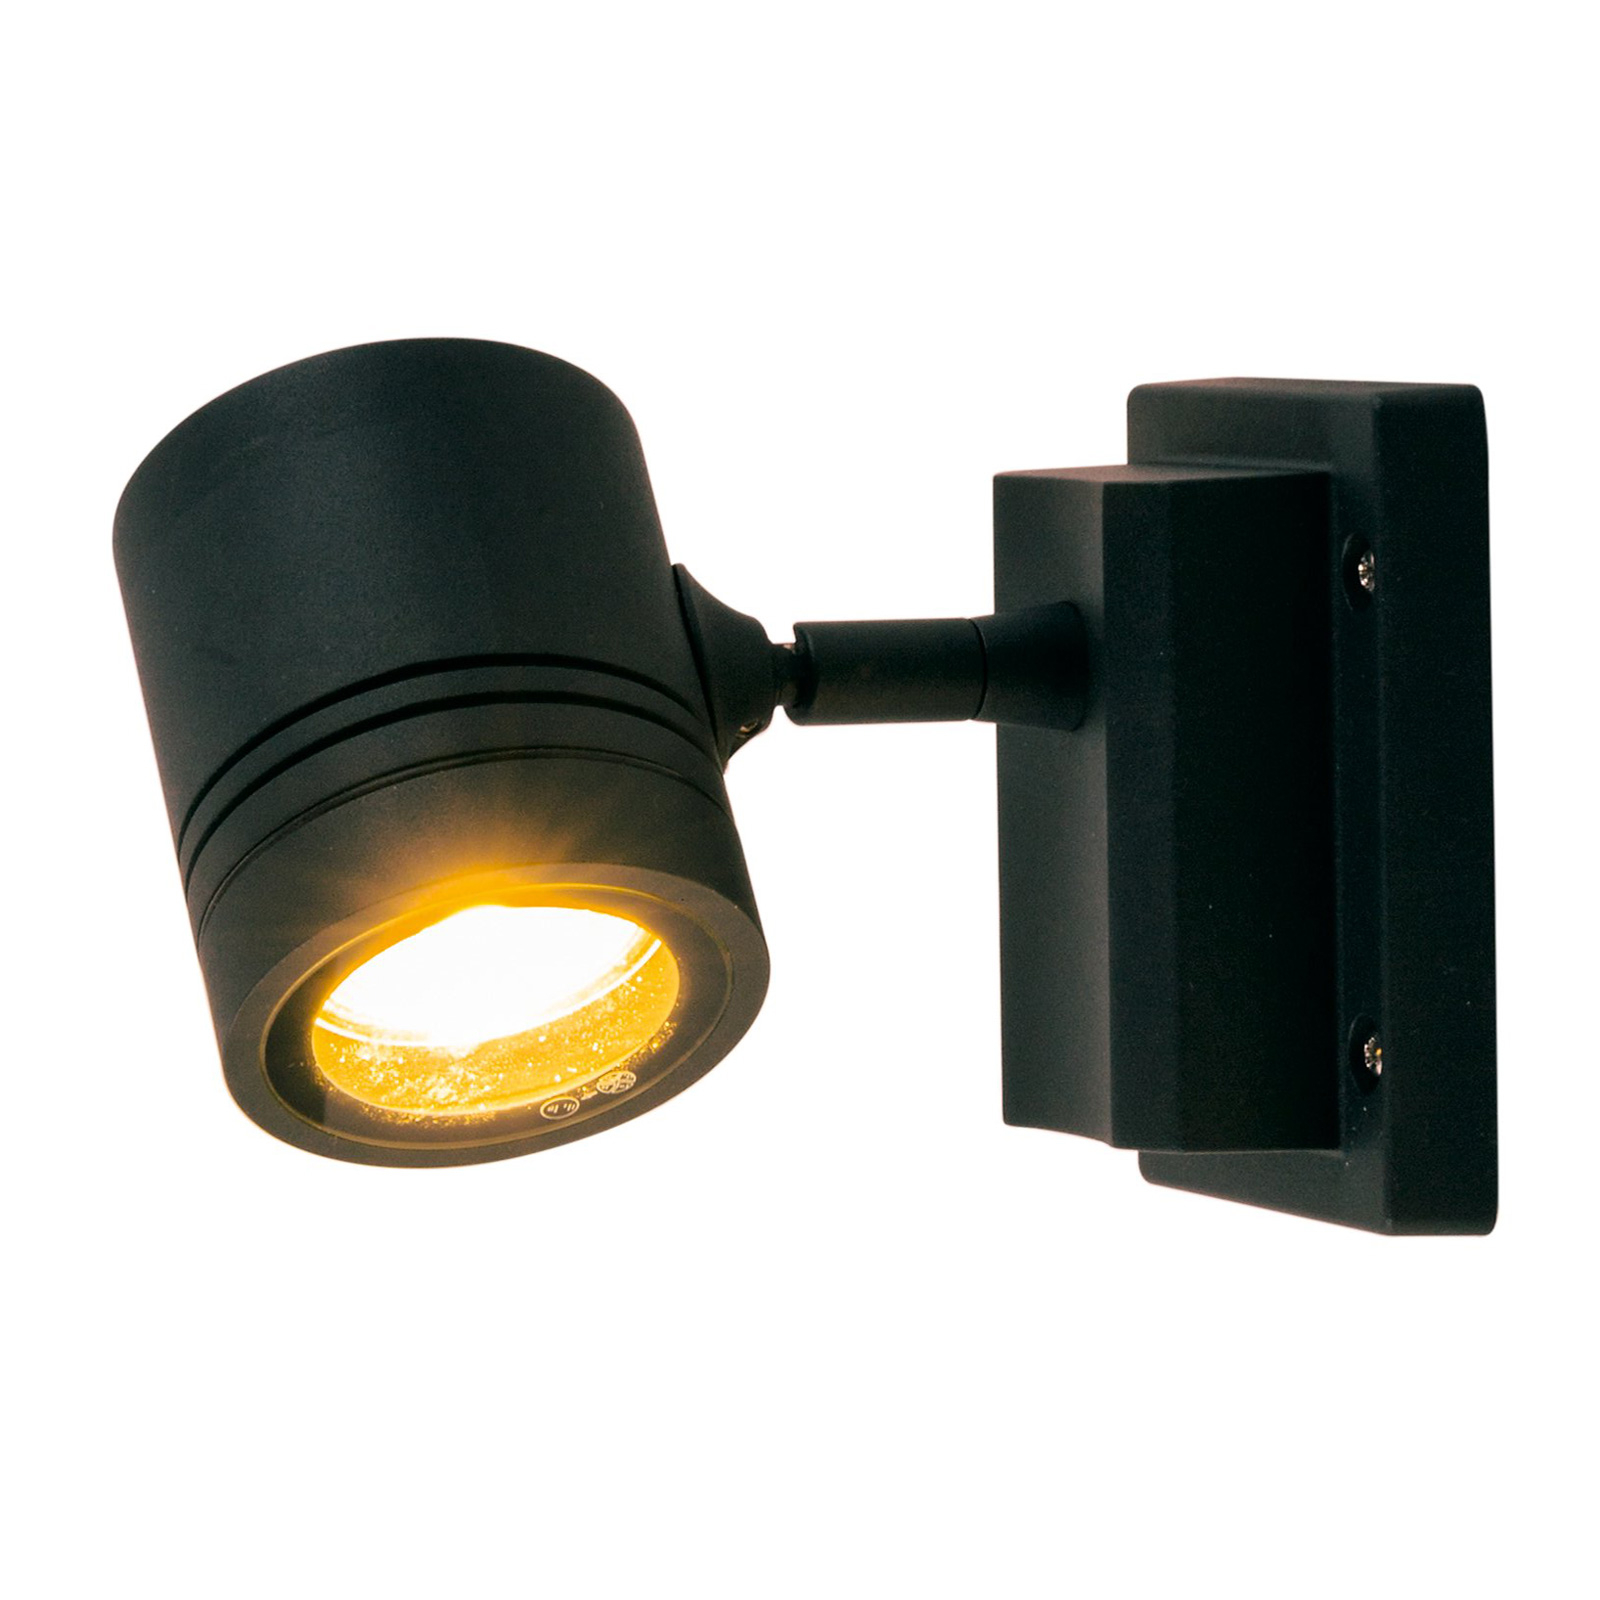 Borneo outdoor wall light, 1-bulb and adjustable